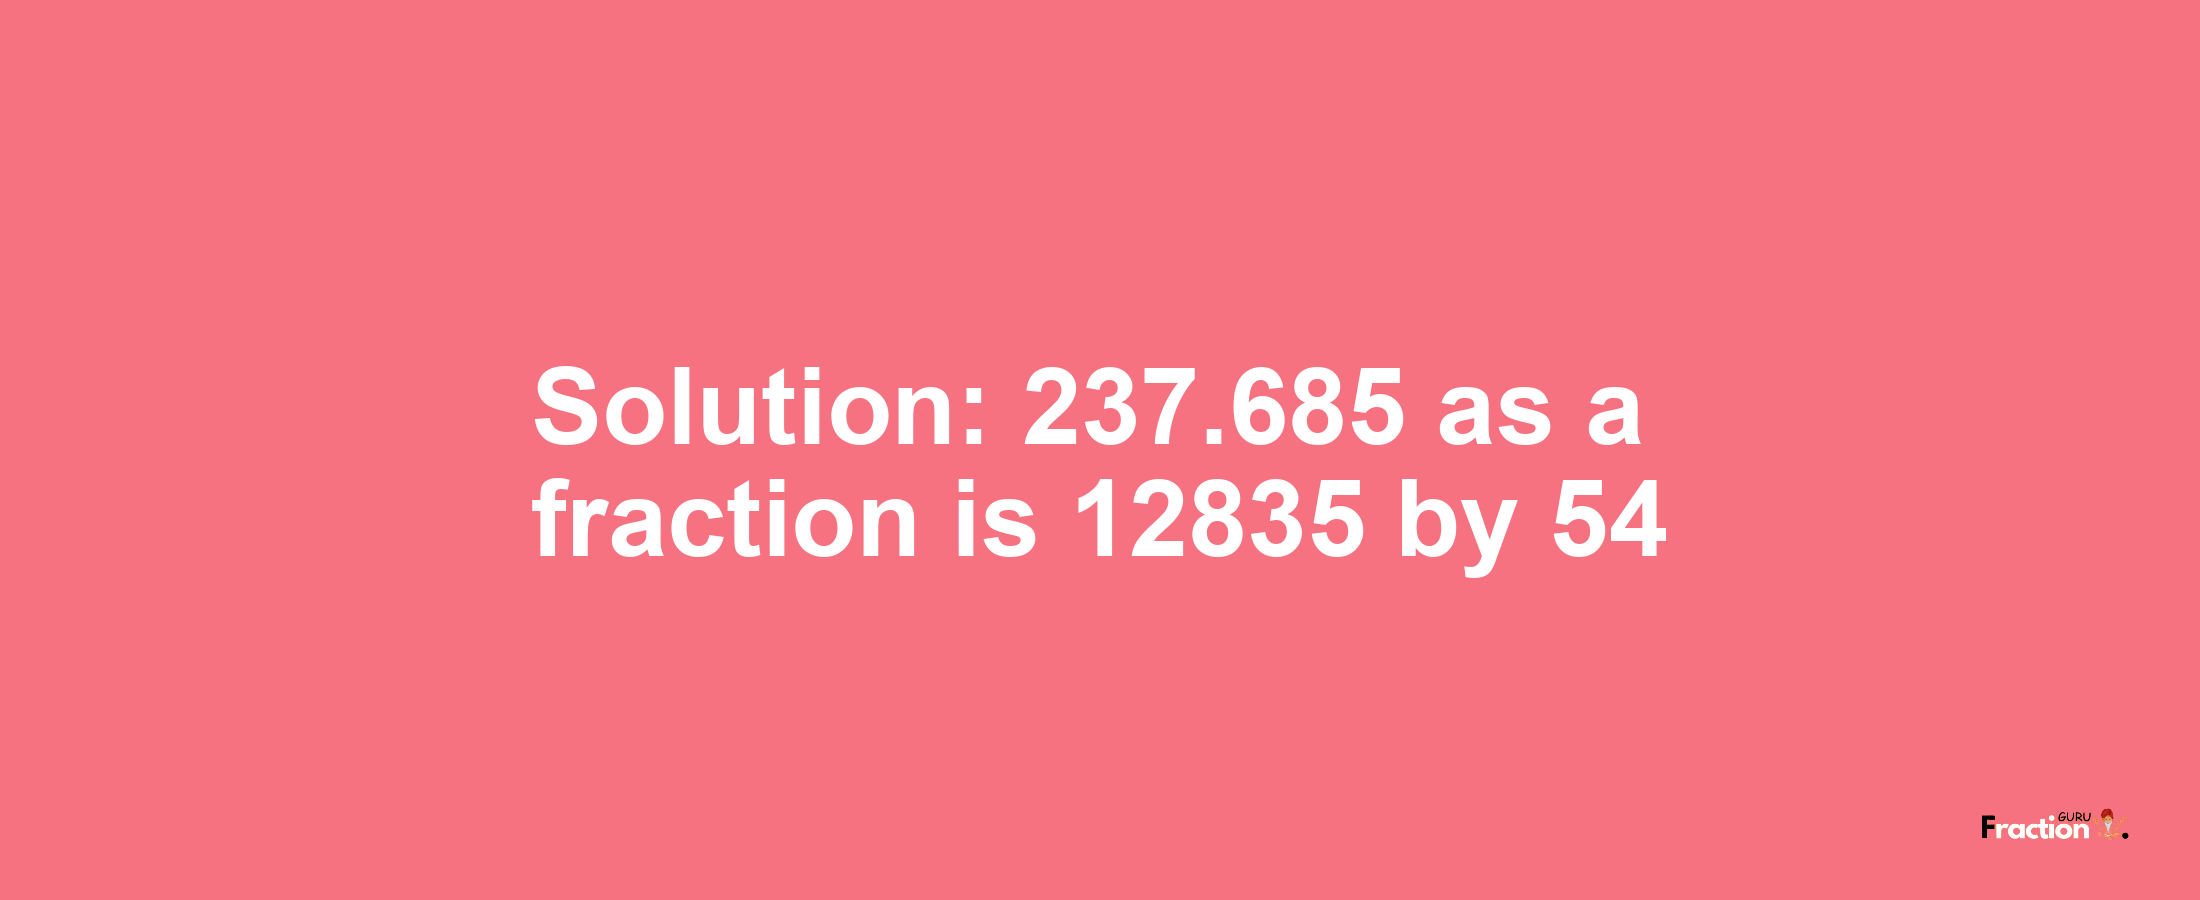 Solution:237.685 as a fraction is 12835/54